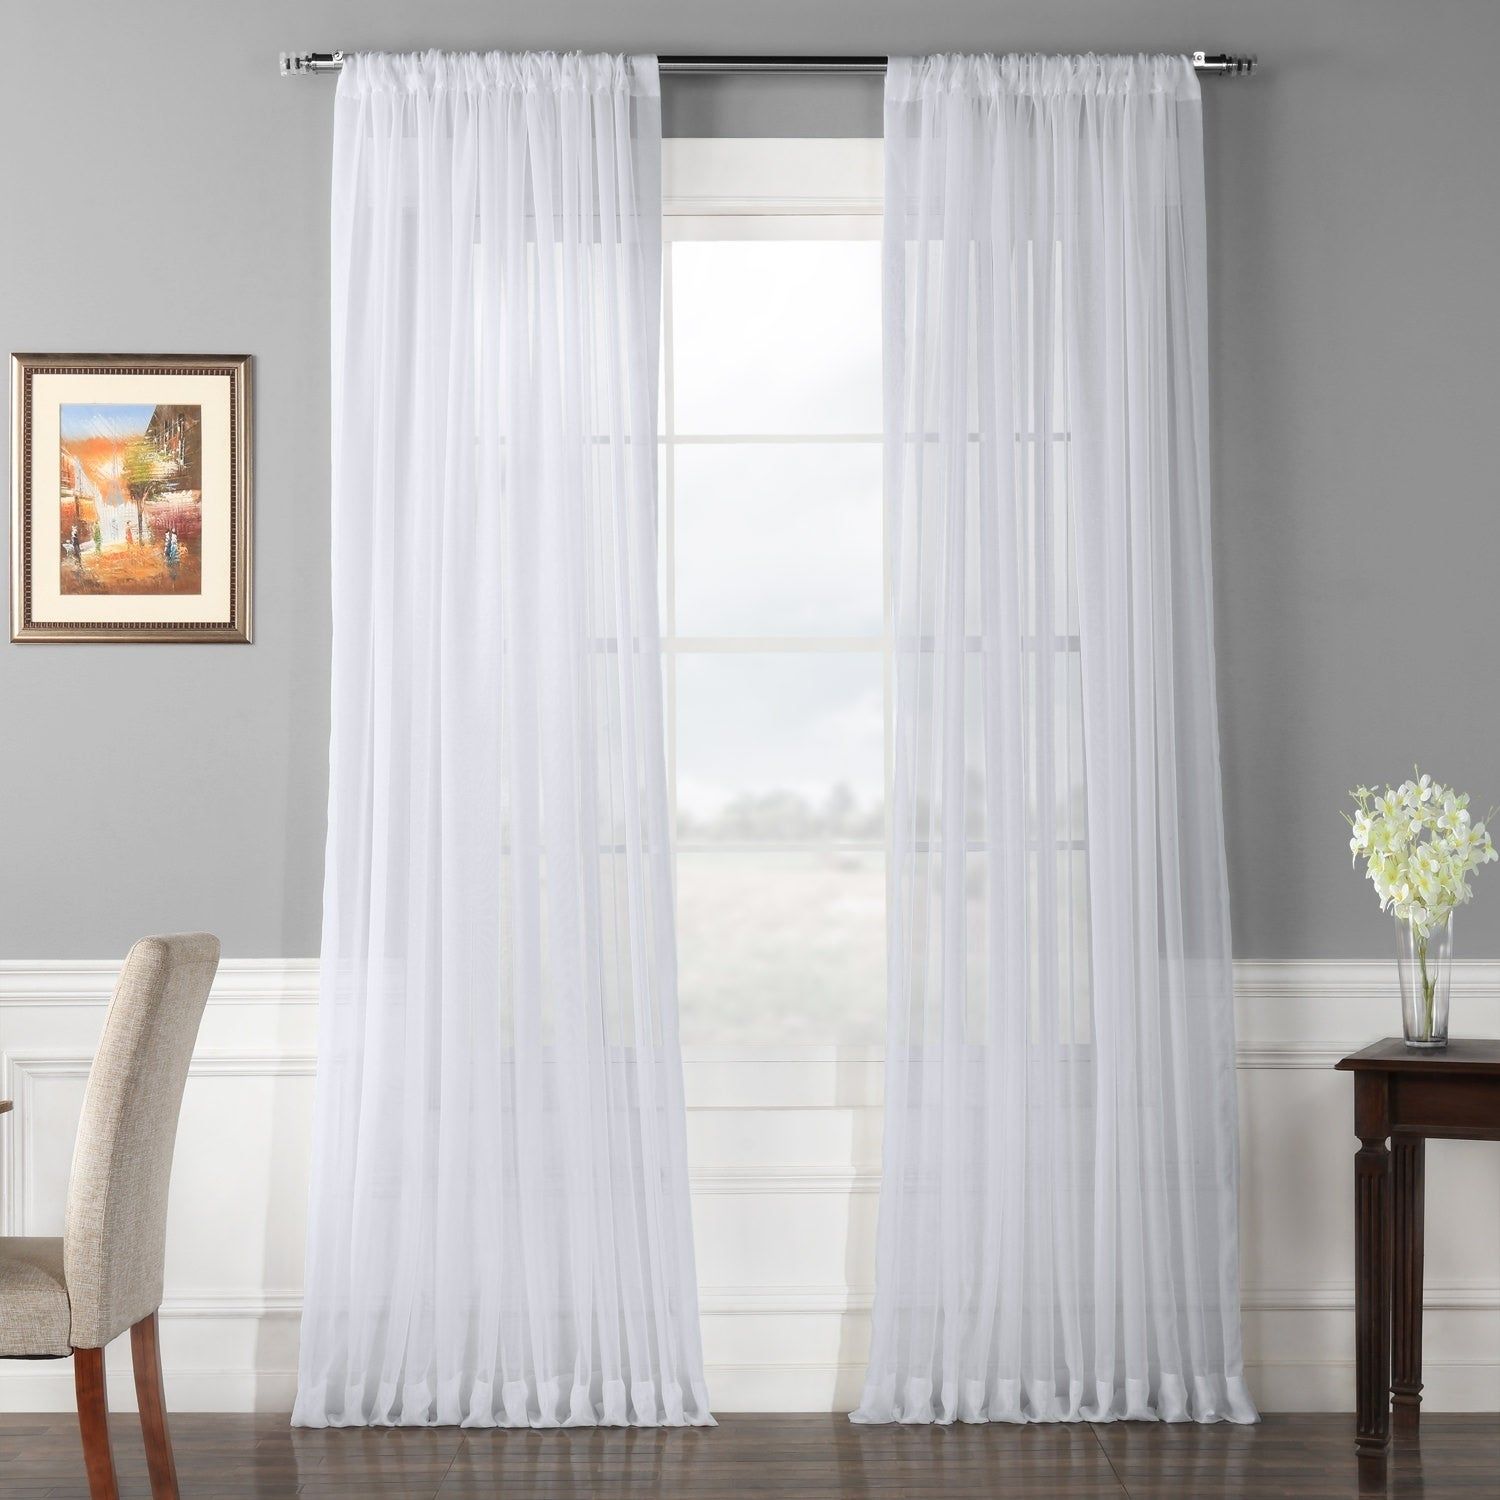 Exclusive Fabrics Extra Wide White Voile Sheer Curtain Panel With Double Layer Sheer White Single Curtain Panels (View 19 of 20)